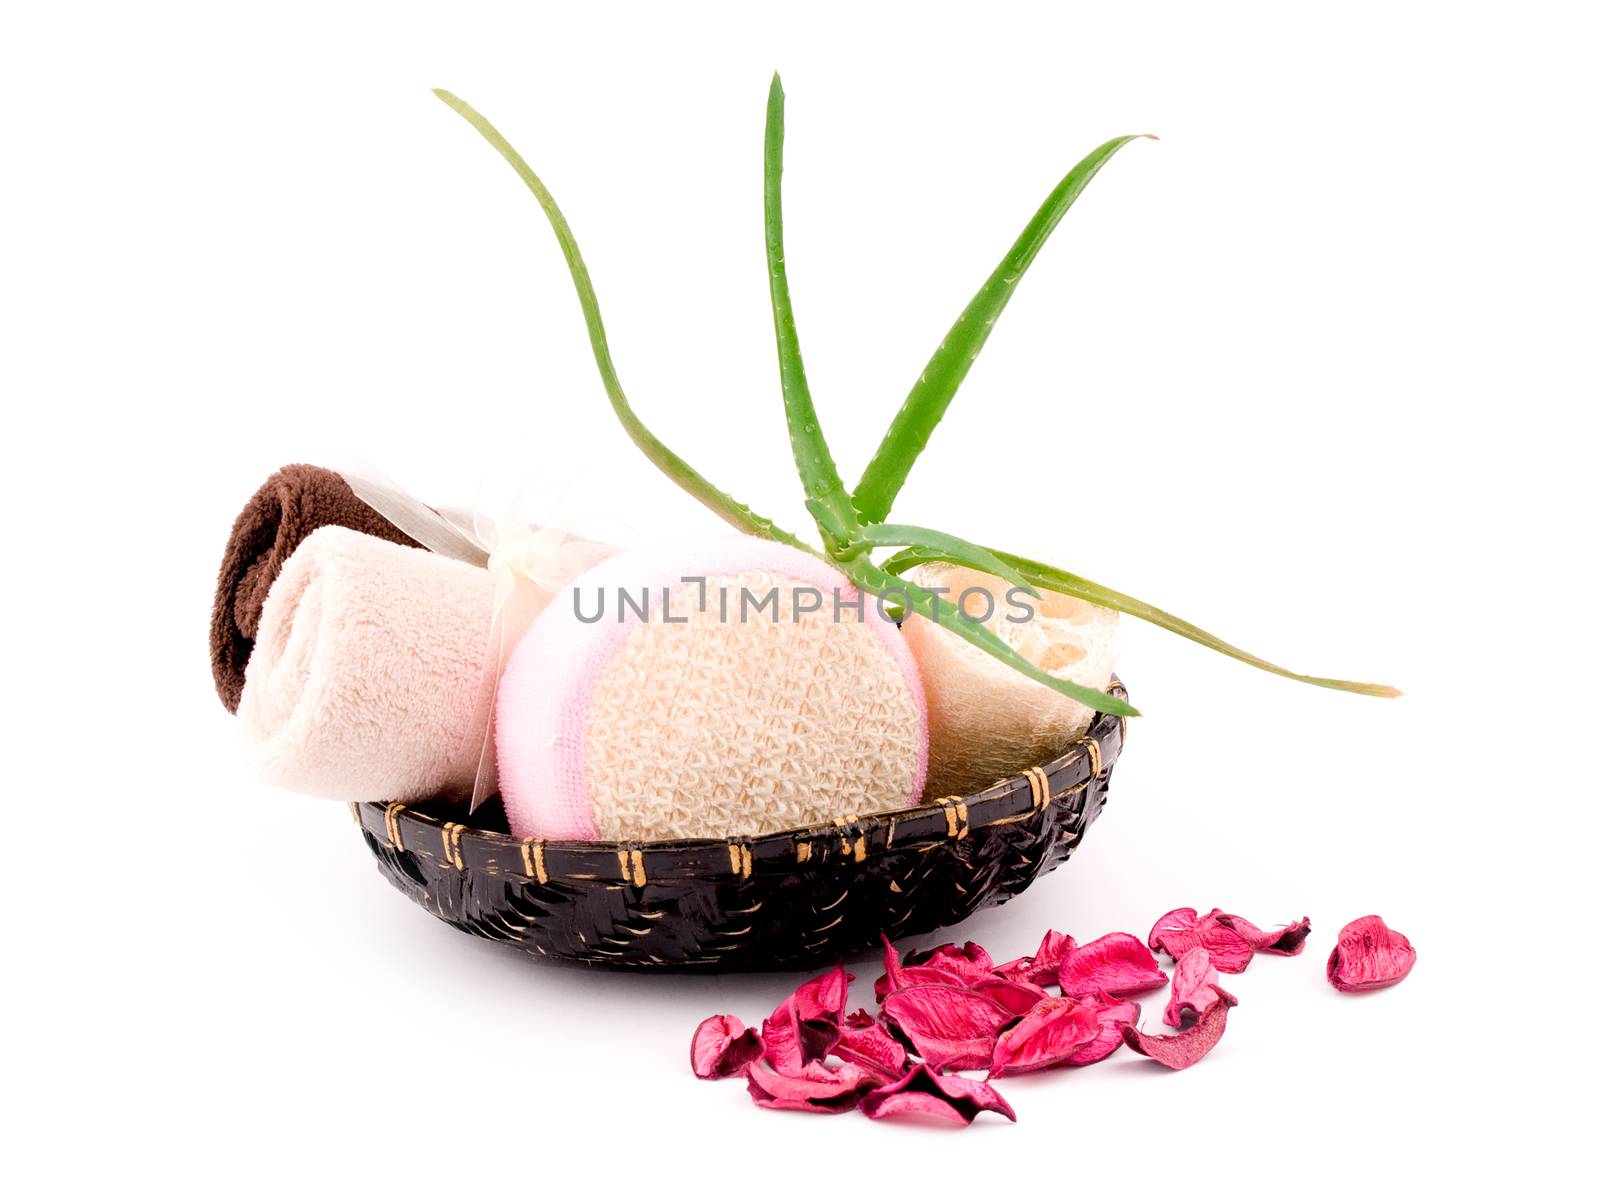 Bath and spa accessories in black basket on white background